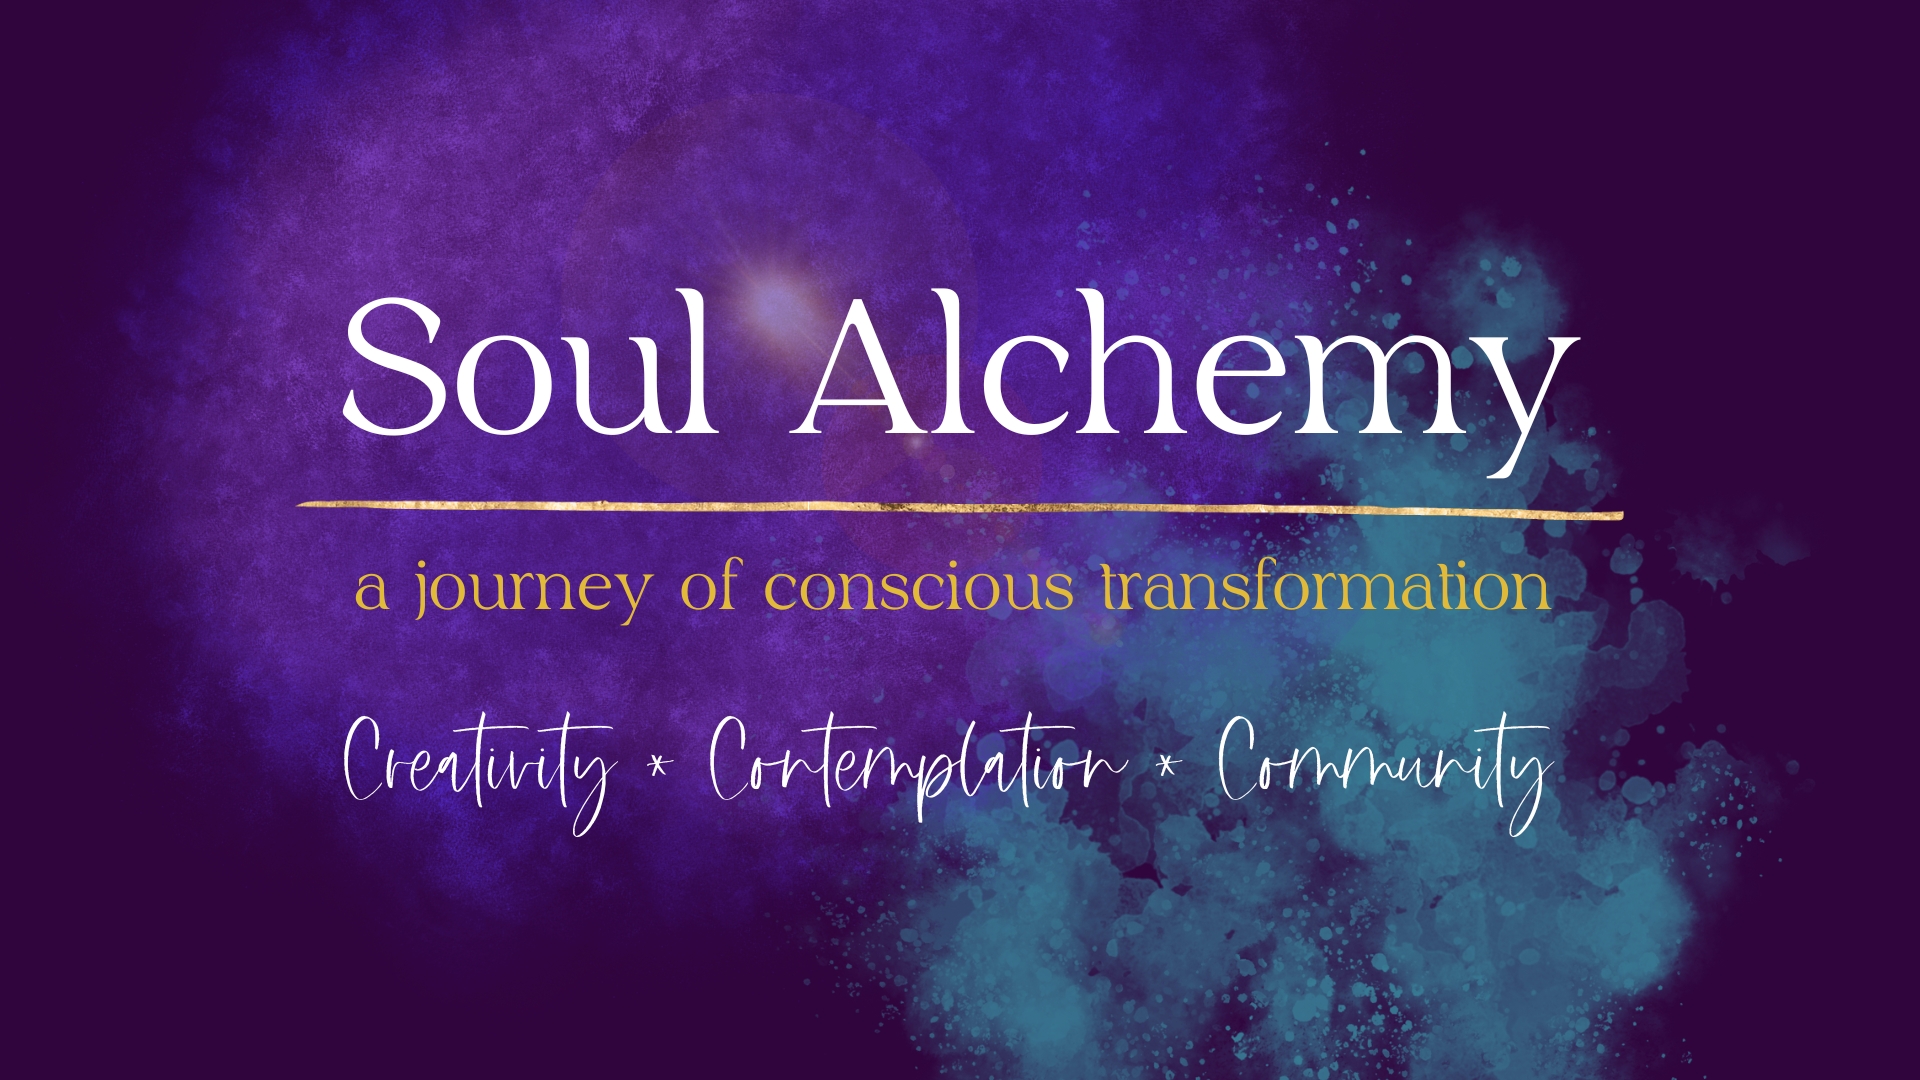 Dark purple background with text: Soul Alchemy, a journey of conscious transformation. Creativity, contemplation and community.